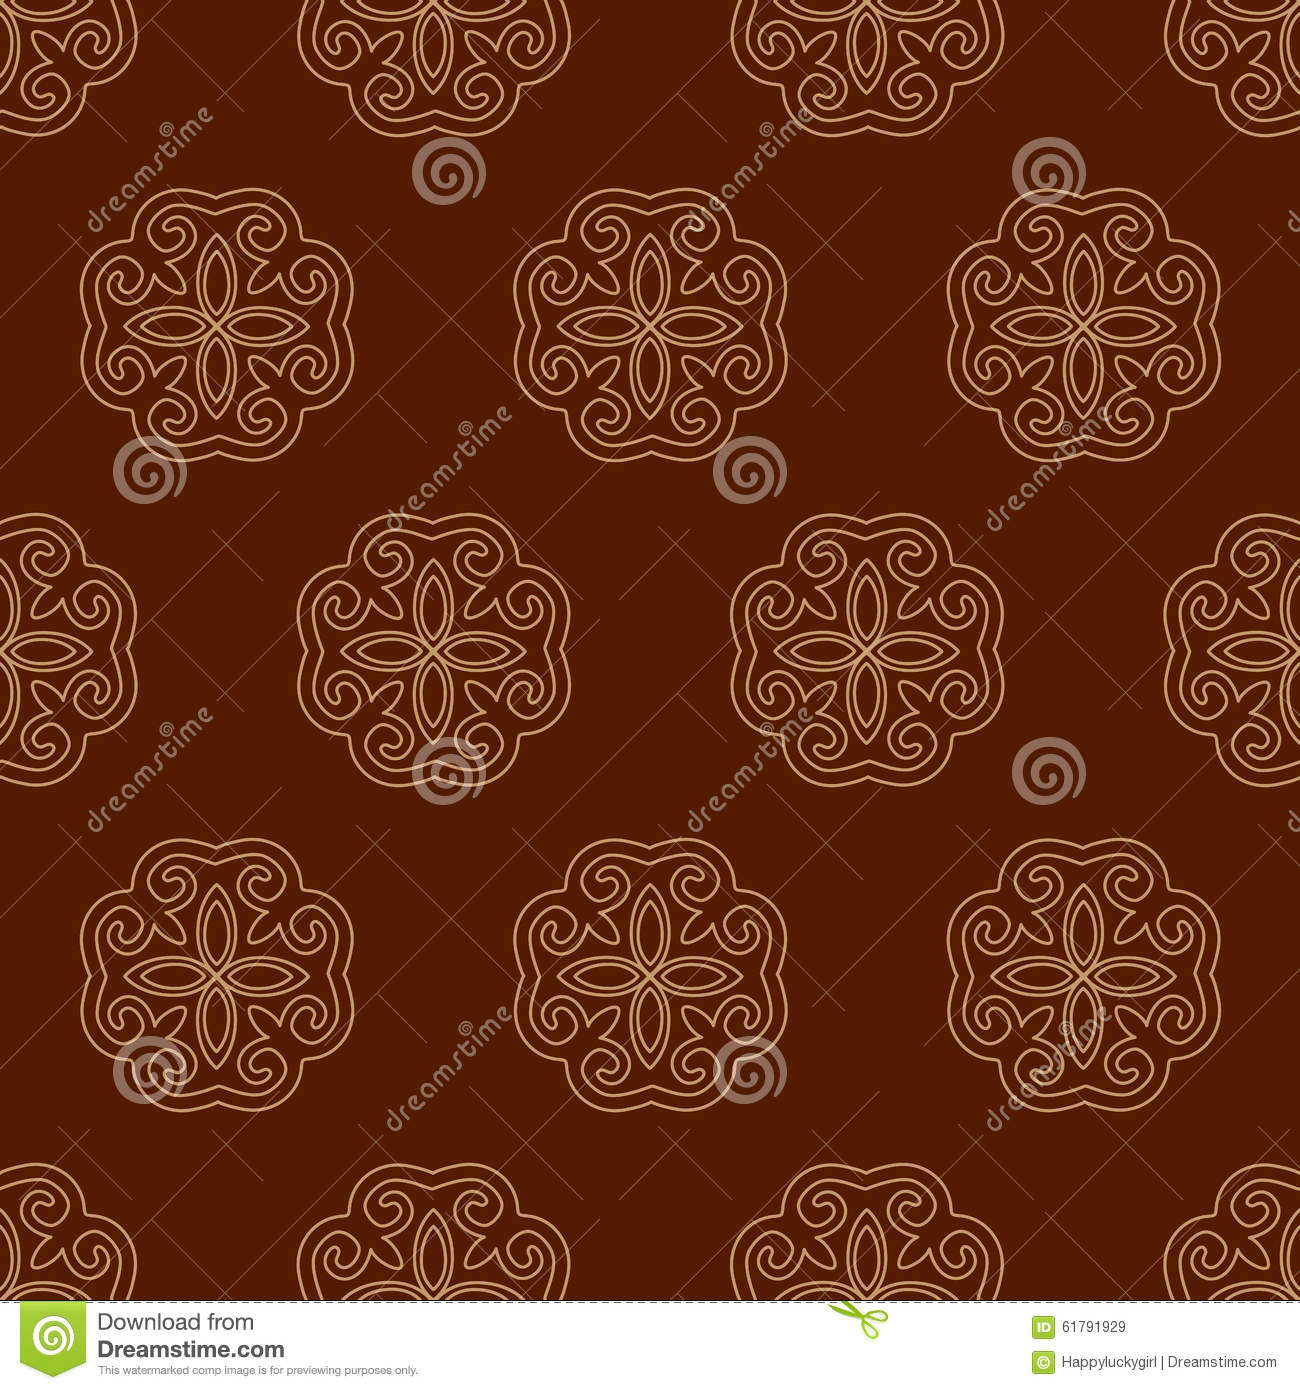 Asian Background Patterns